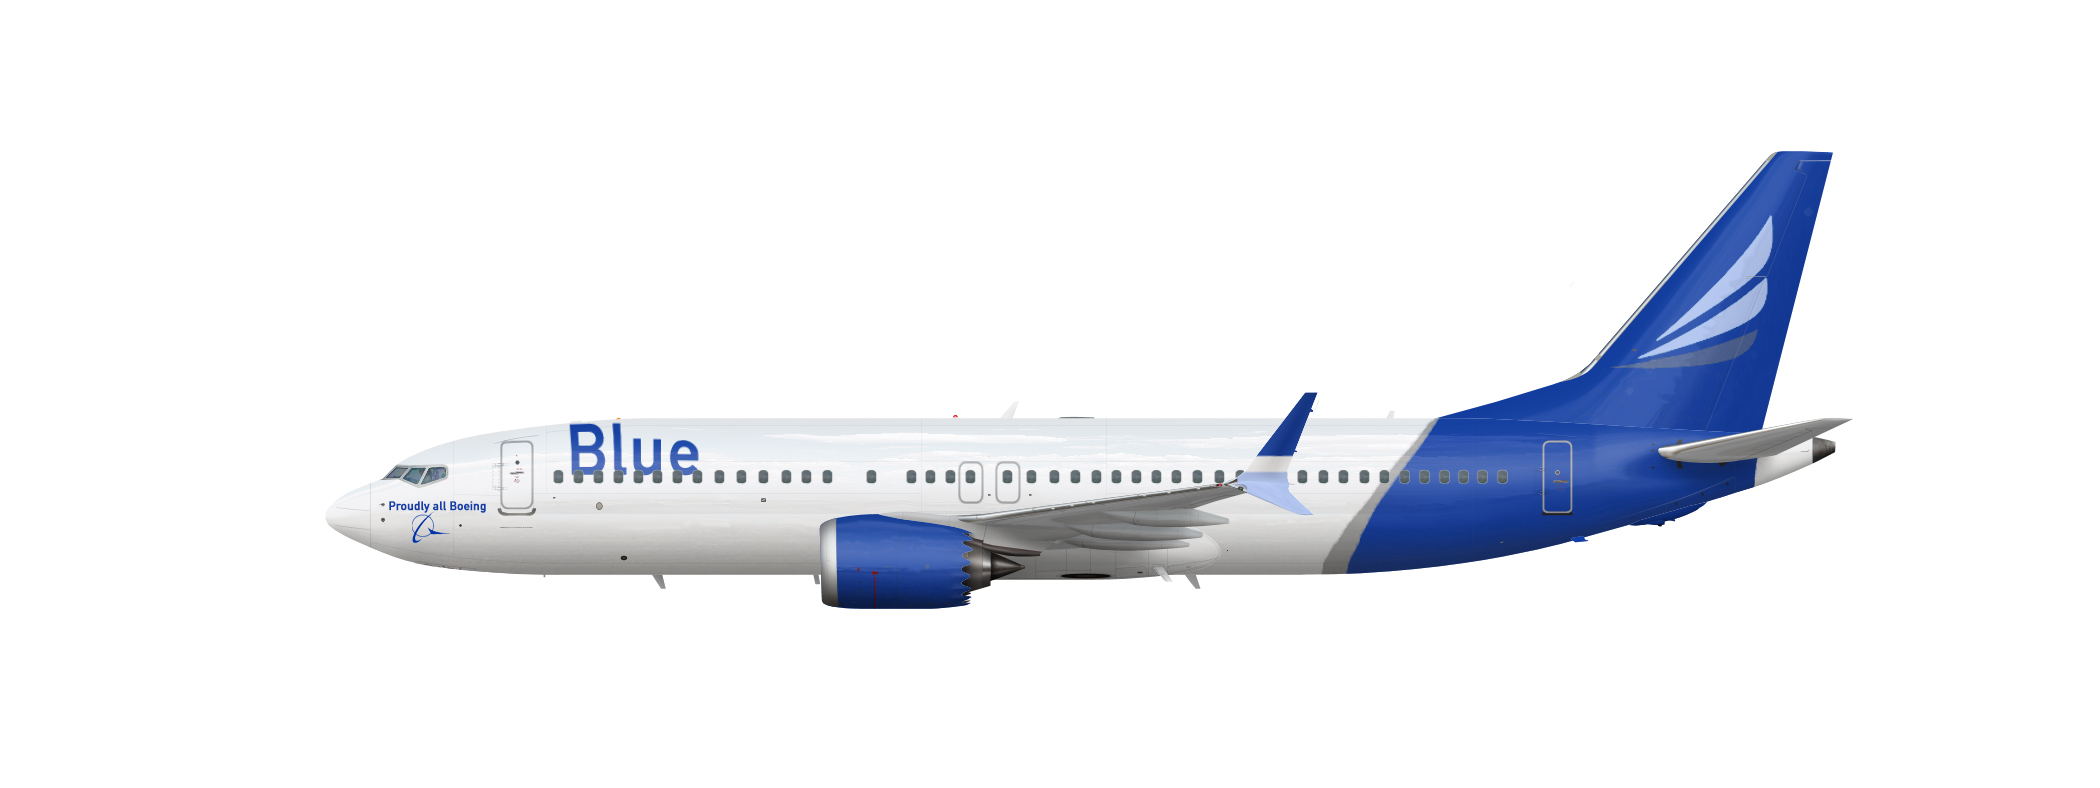 Boeing 737 MAX 8 Blue Airlines